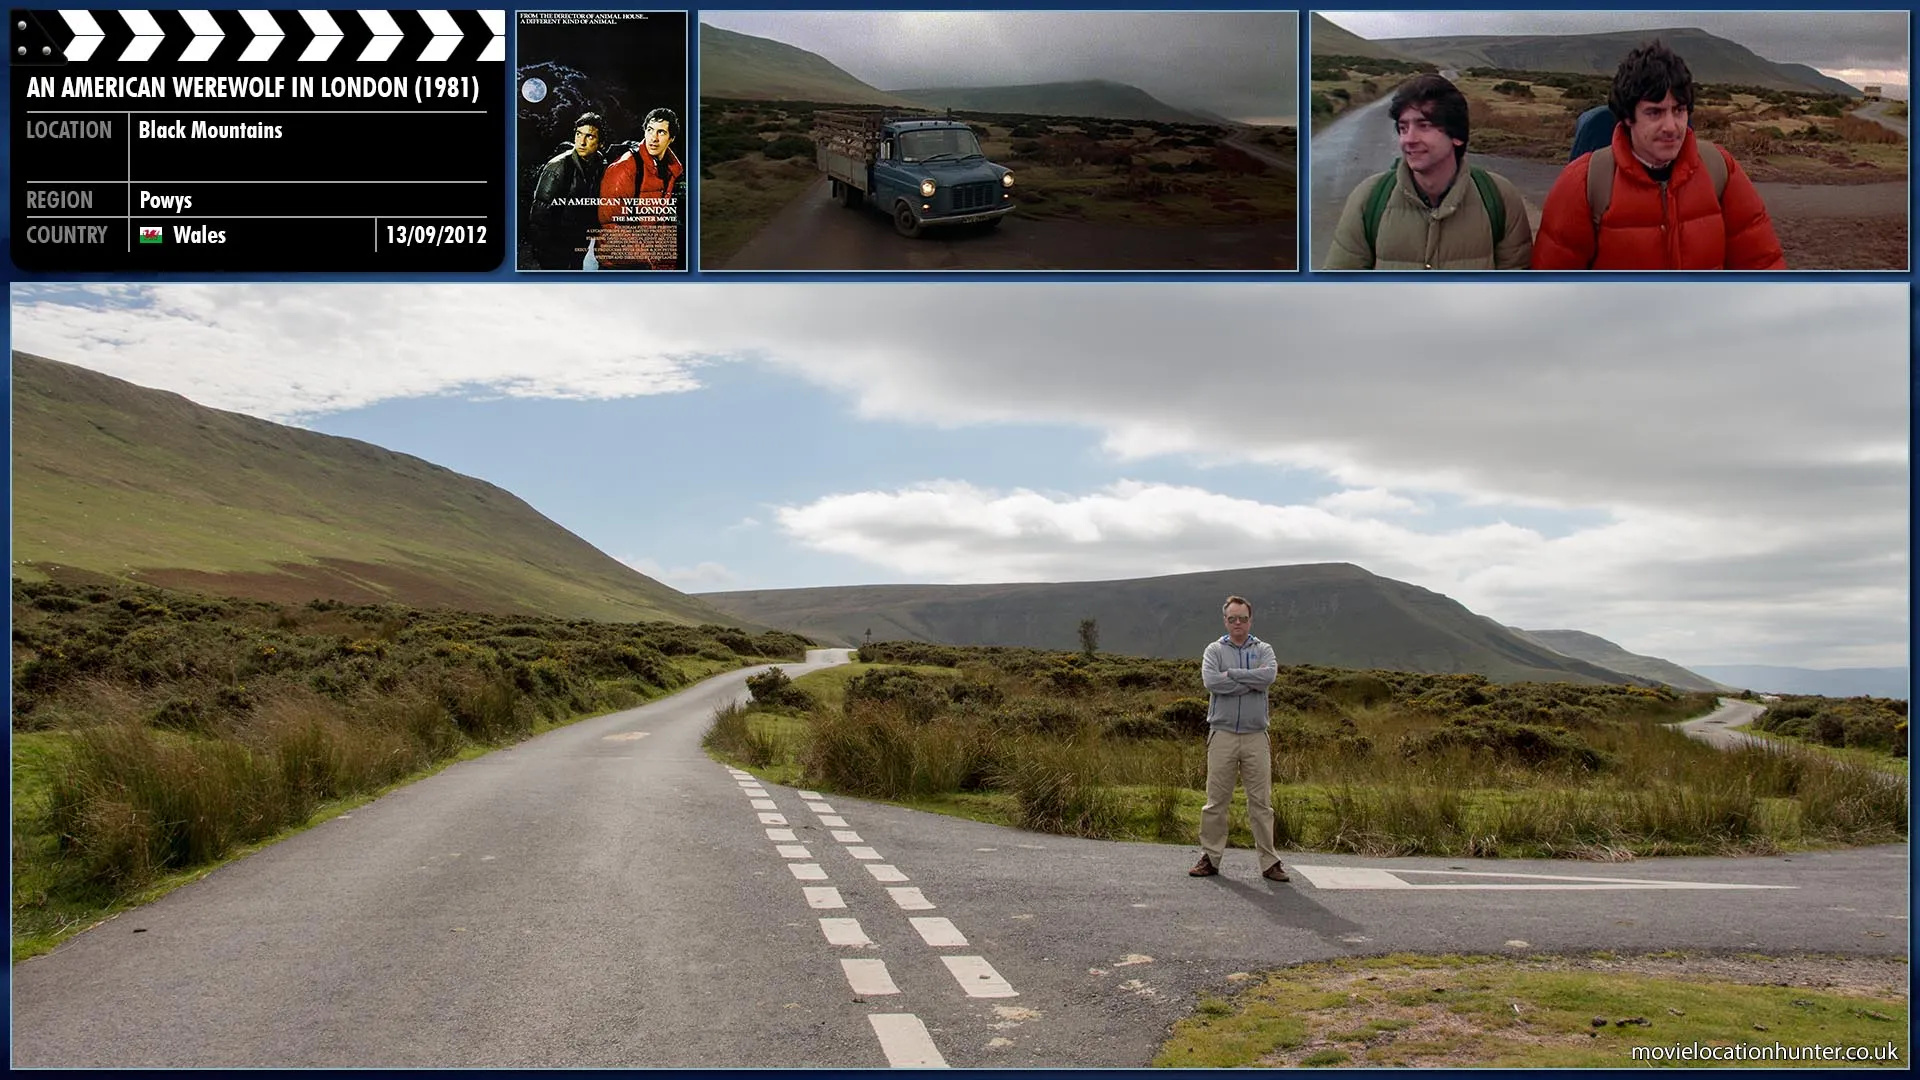 Filming location photo, shot in Wales, for An American Werewolf in London (1981). Scene description: Hiking on a road on the Yorkshire moors of Northern England, American college students David Kessler (David Naughton) and Jack Goodman (Griffin Dunne) are dropped off by a local farmer.